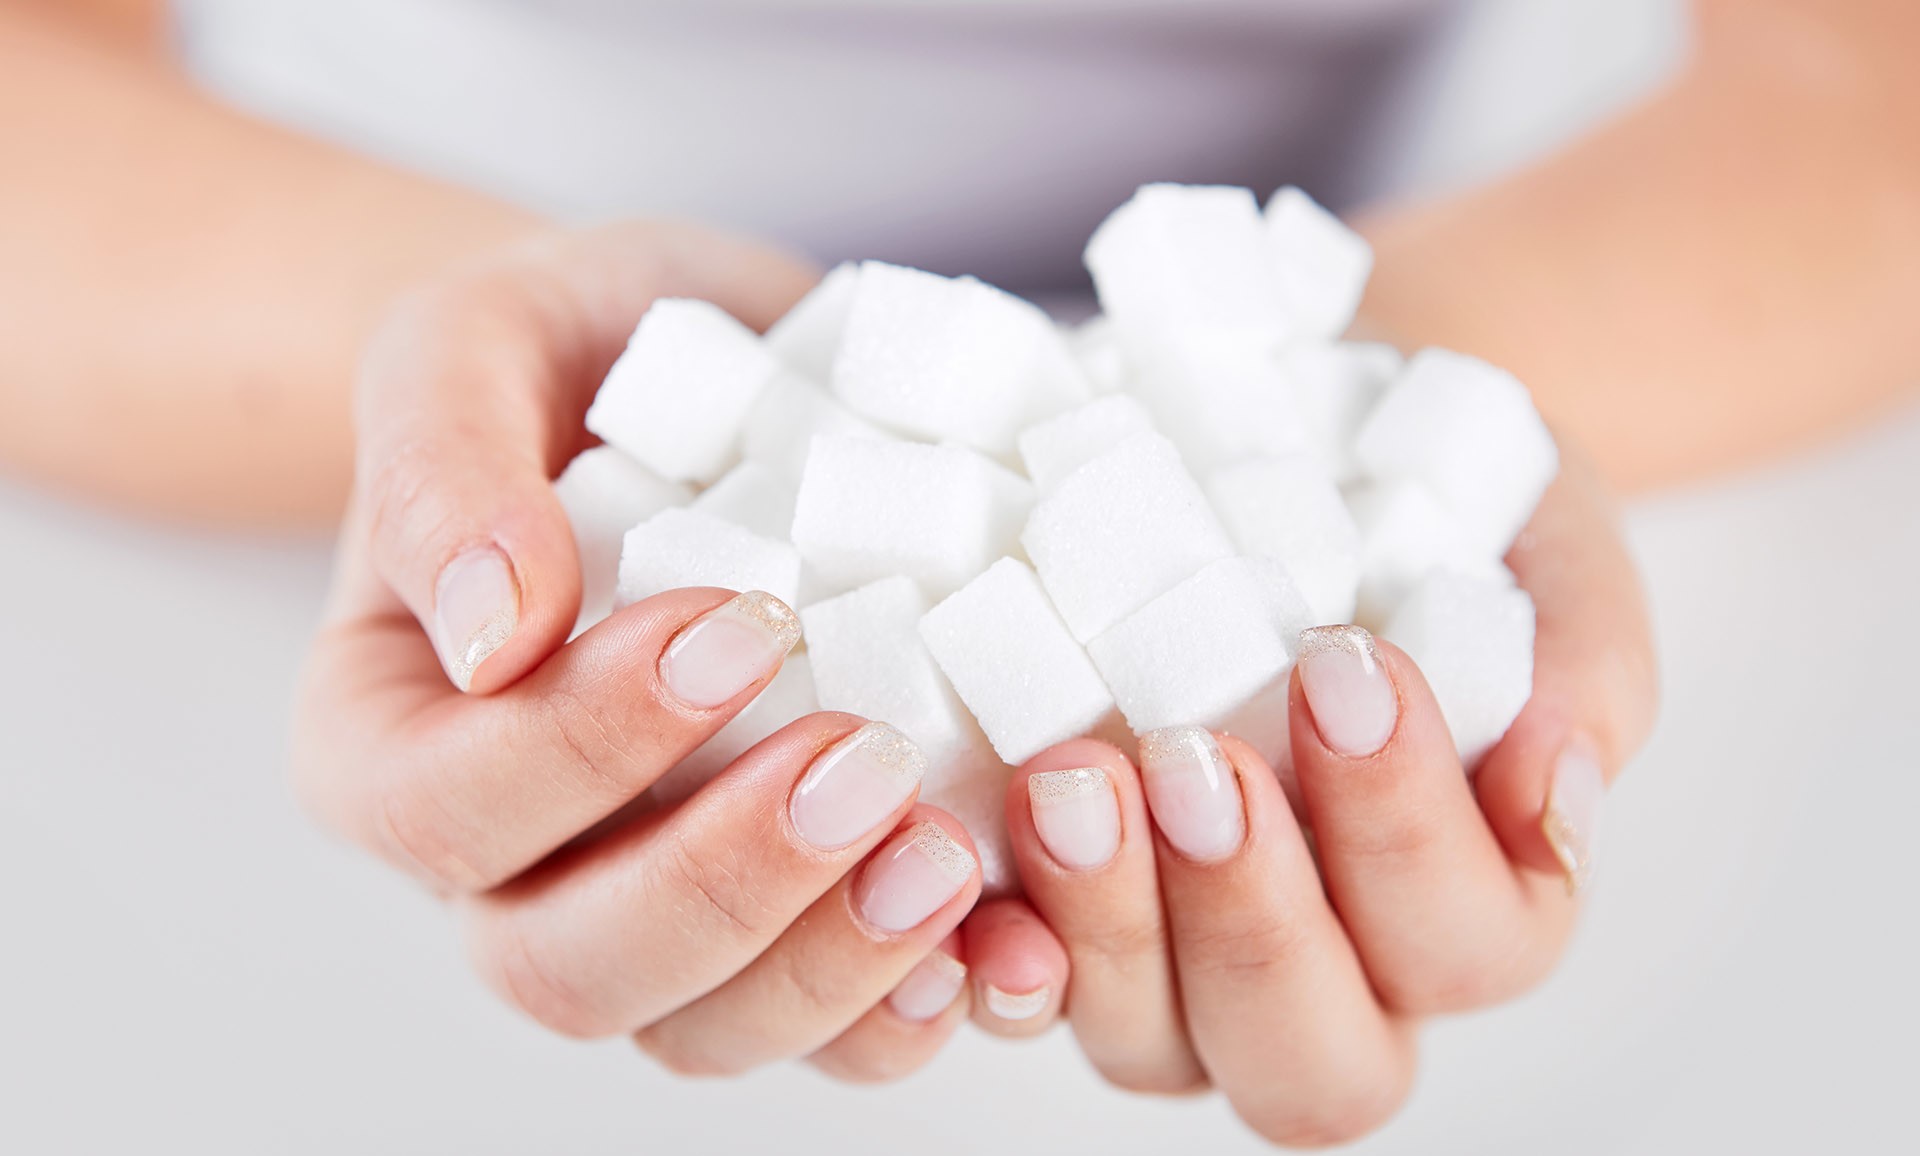 Sugar addiction - Causes, symptoms and other risk factors